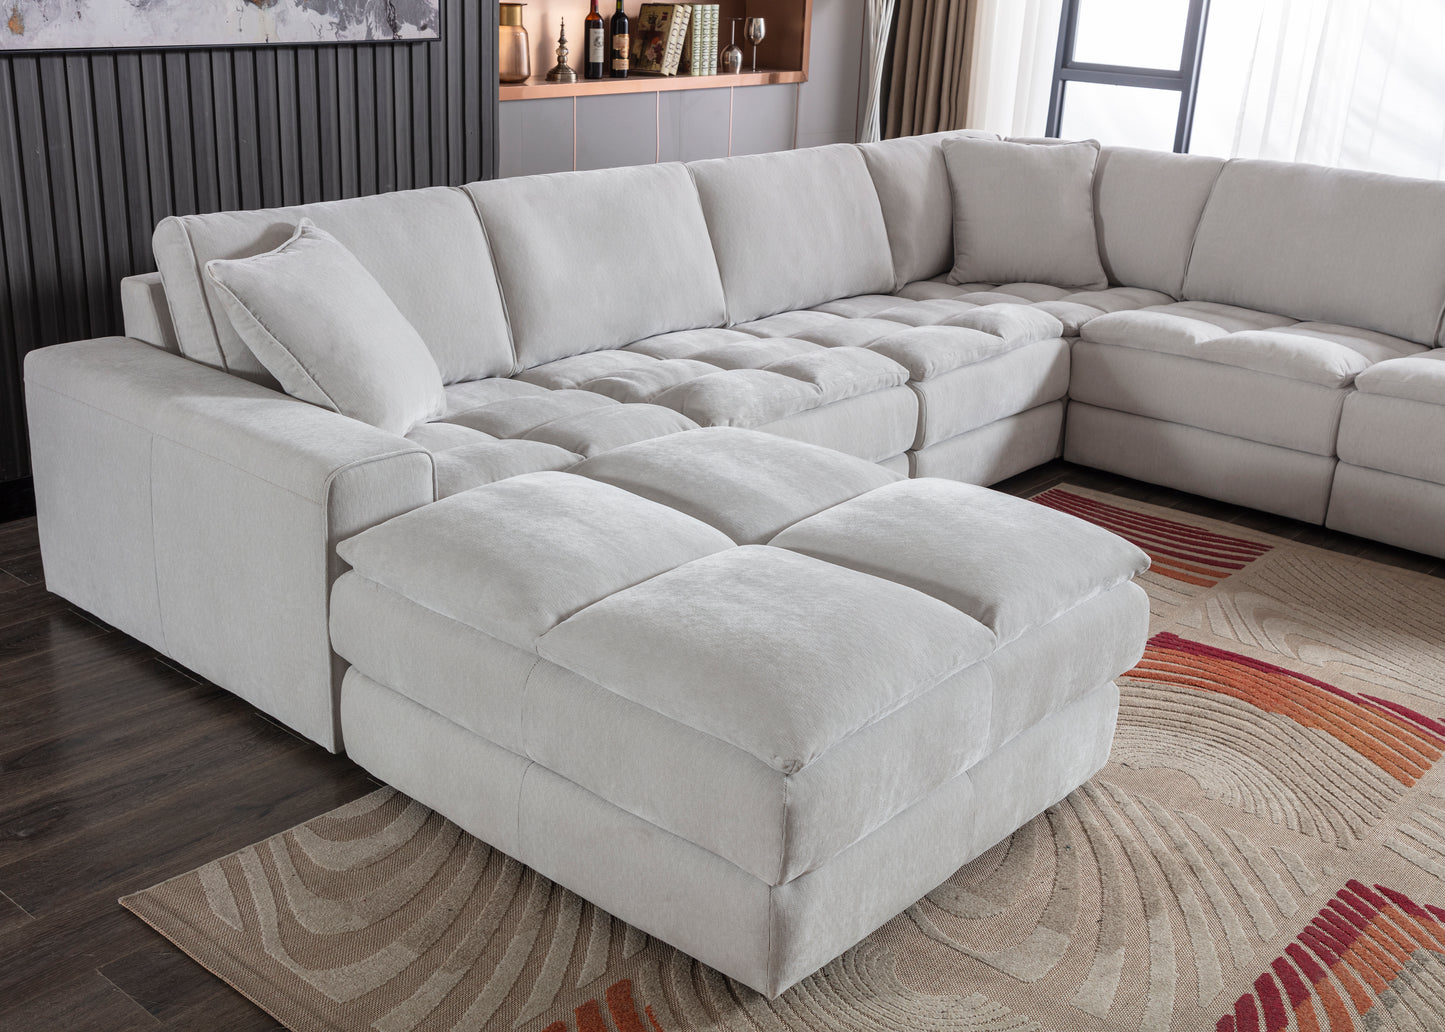 Breton Contemporary Fabric Tufted Modular Sectional Sofa with Ottoman, Oyster